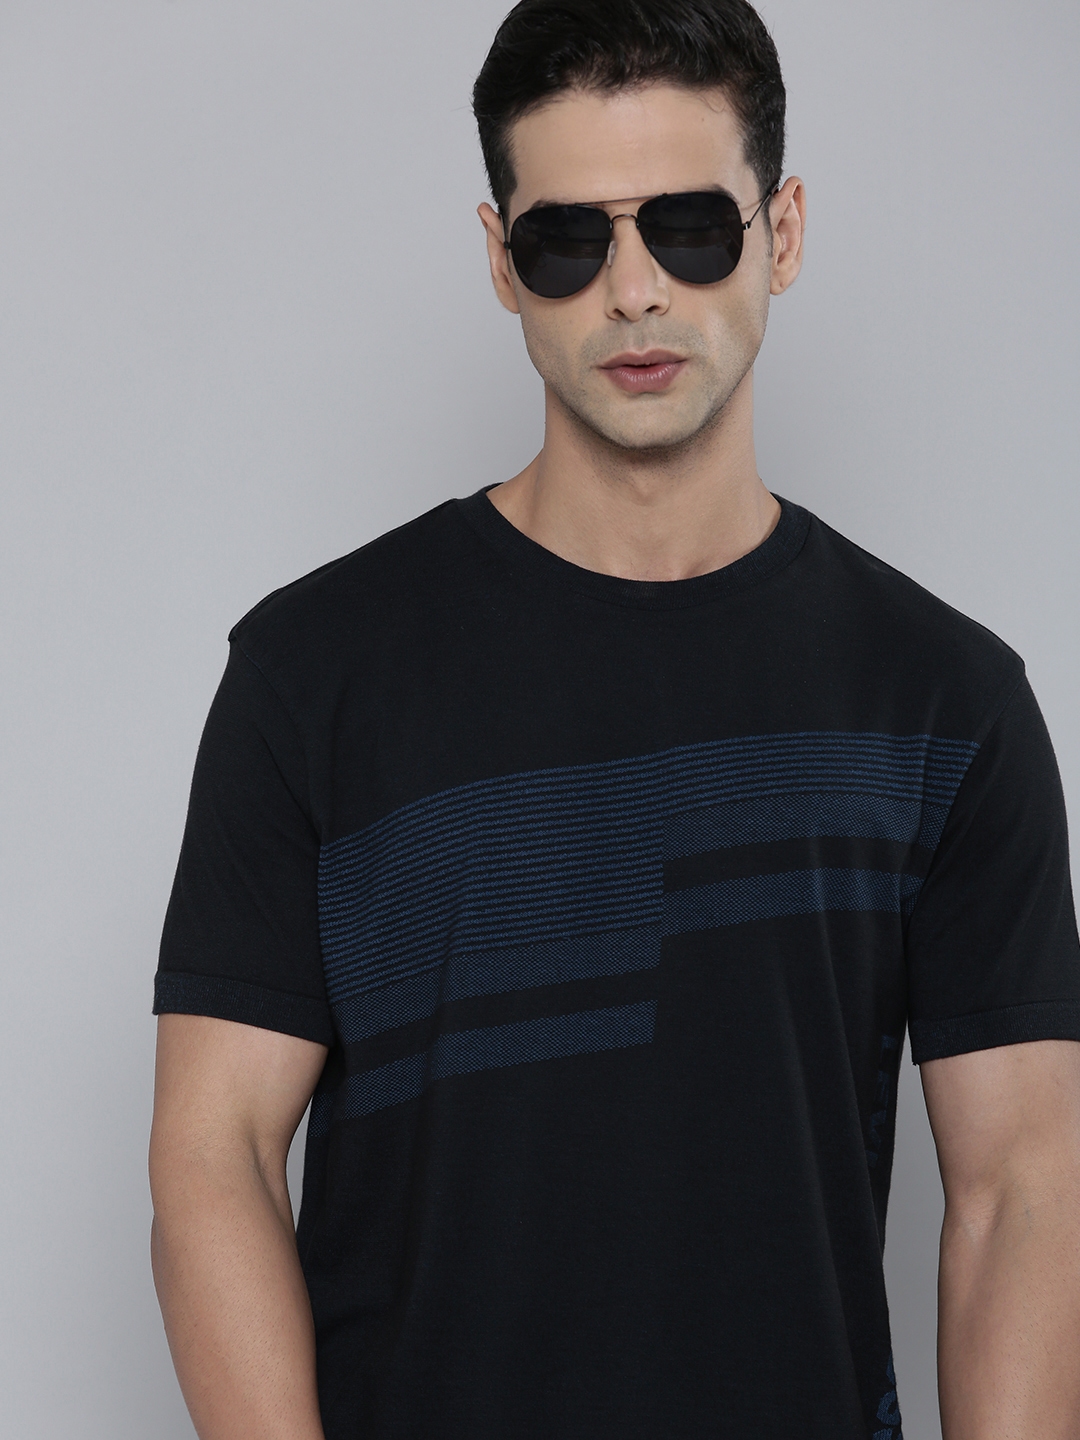 Buy Levis Round Neck Striped T Shirt - Tshirts for Men 23732634 | Myntra